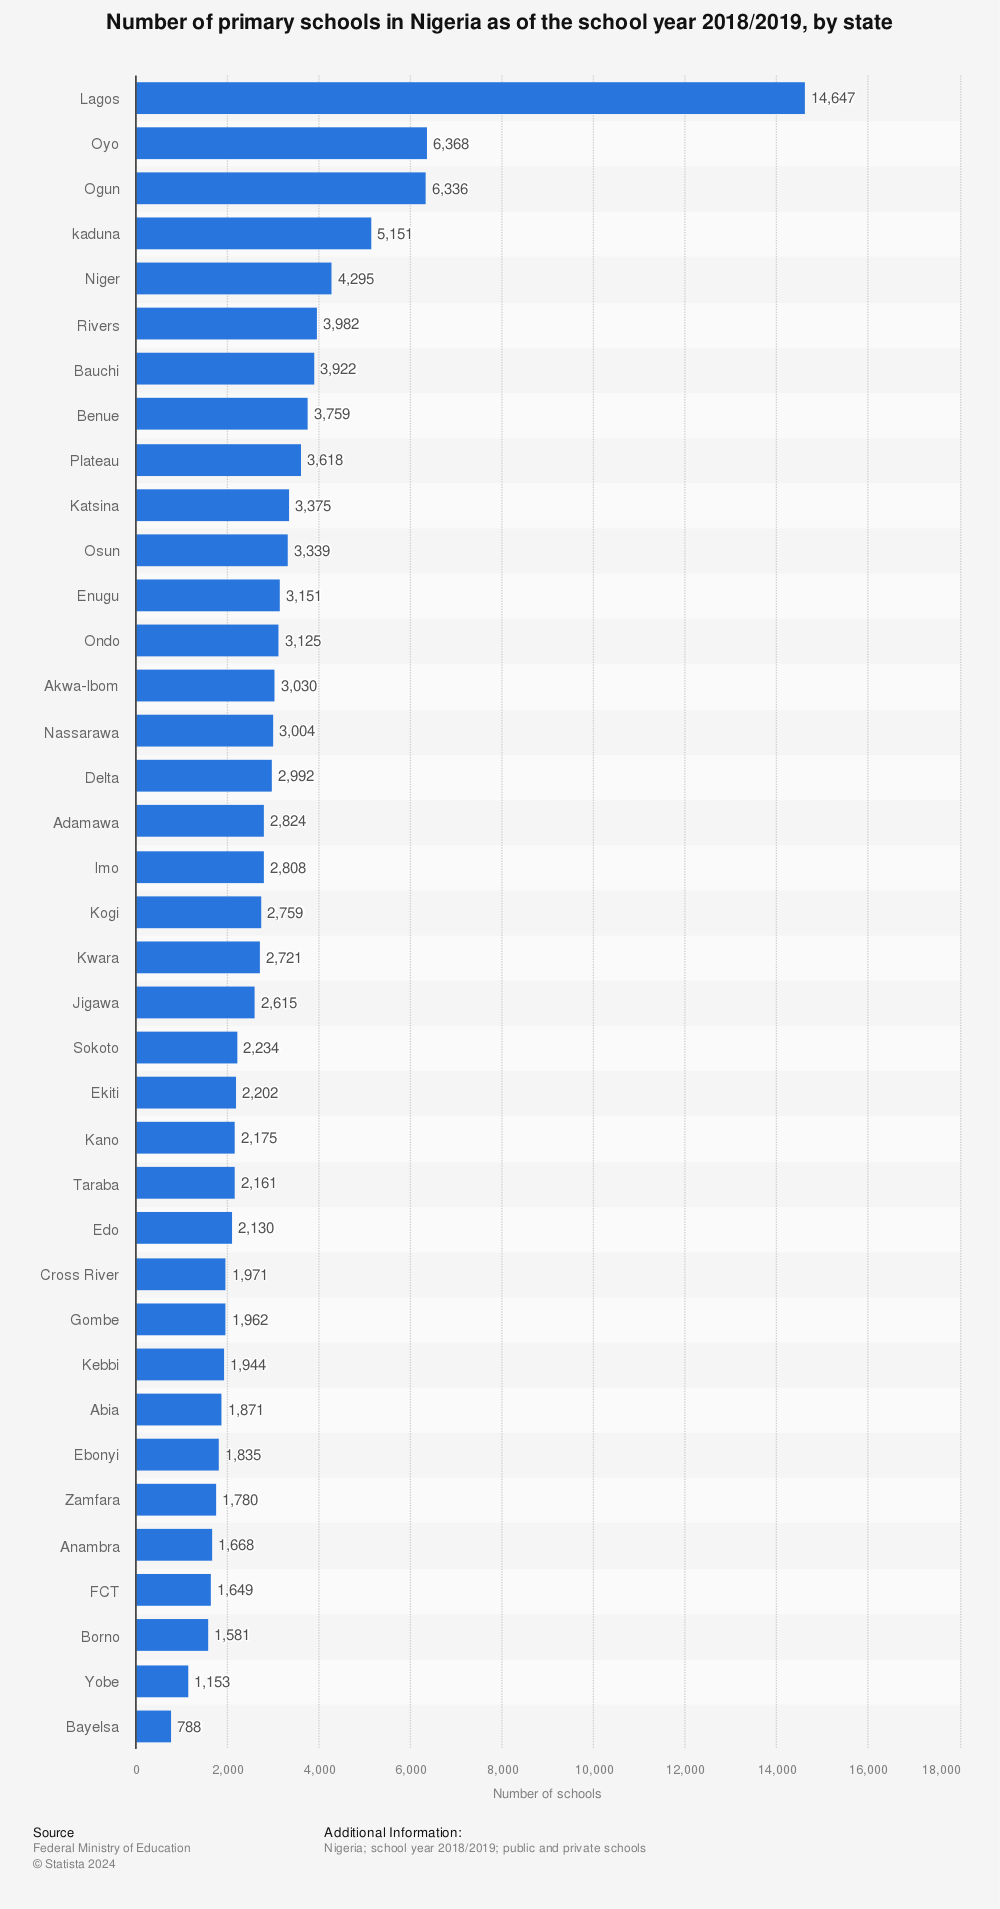 Statistic: Number of primary schools in Nigeria as of the school year 2018/2019, by state | Statista